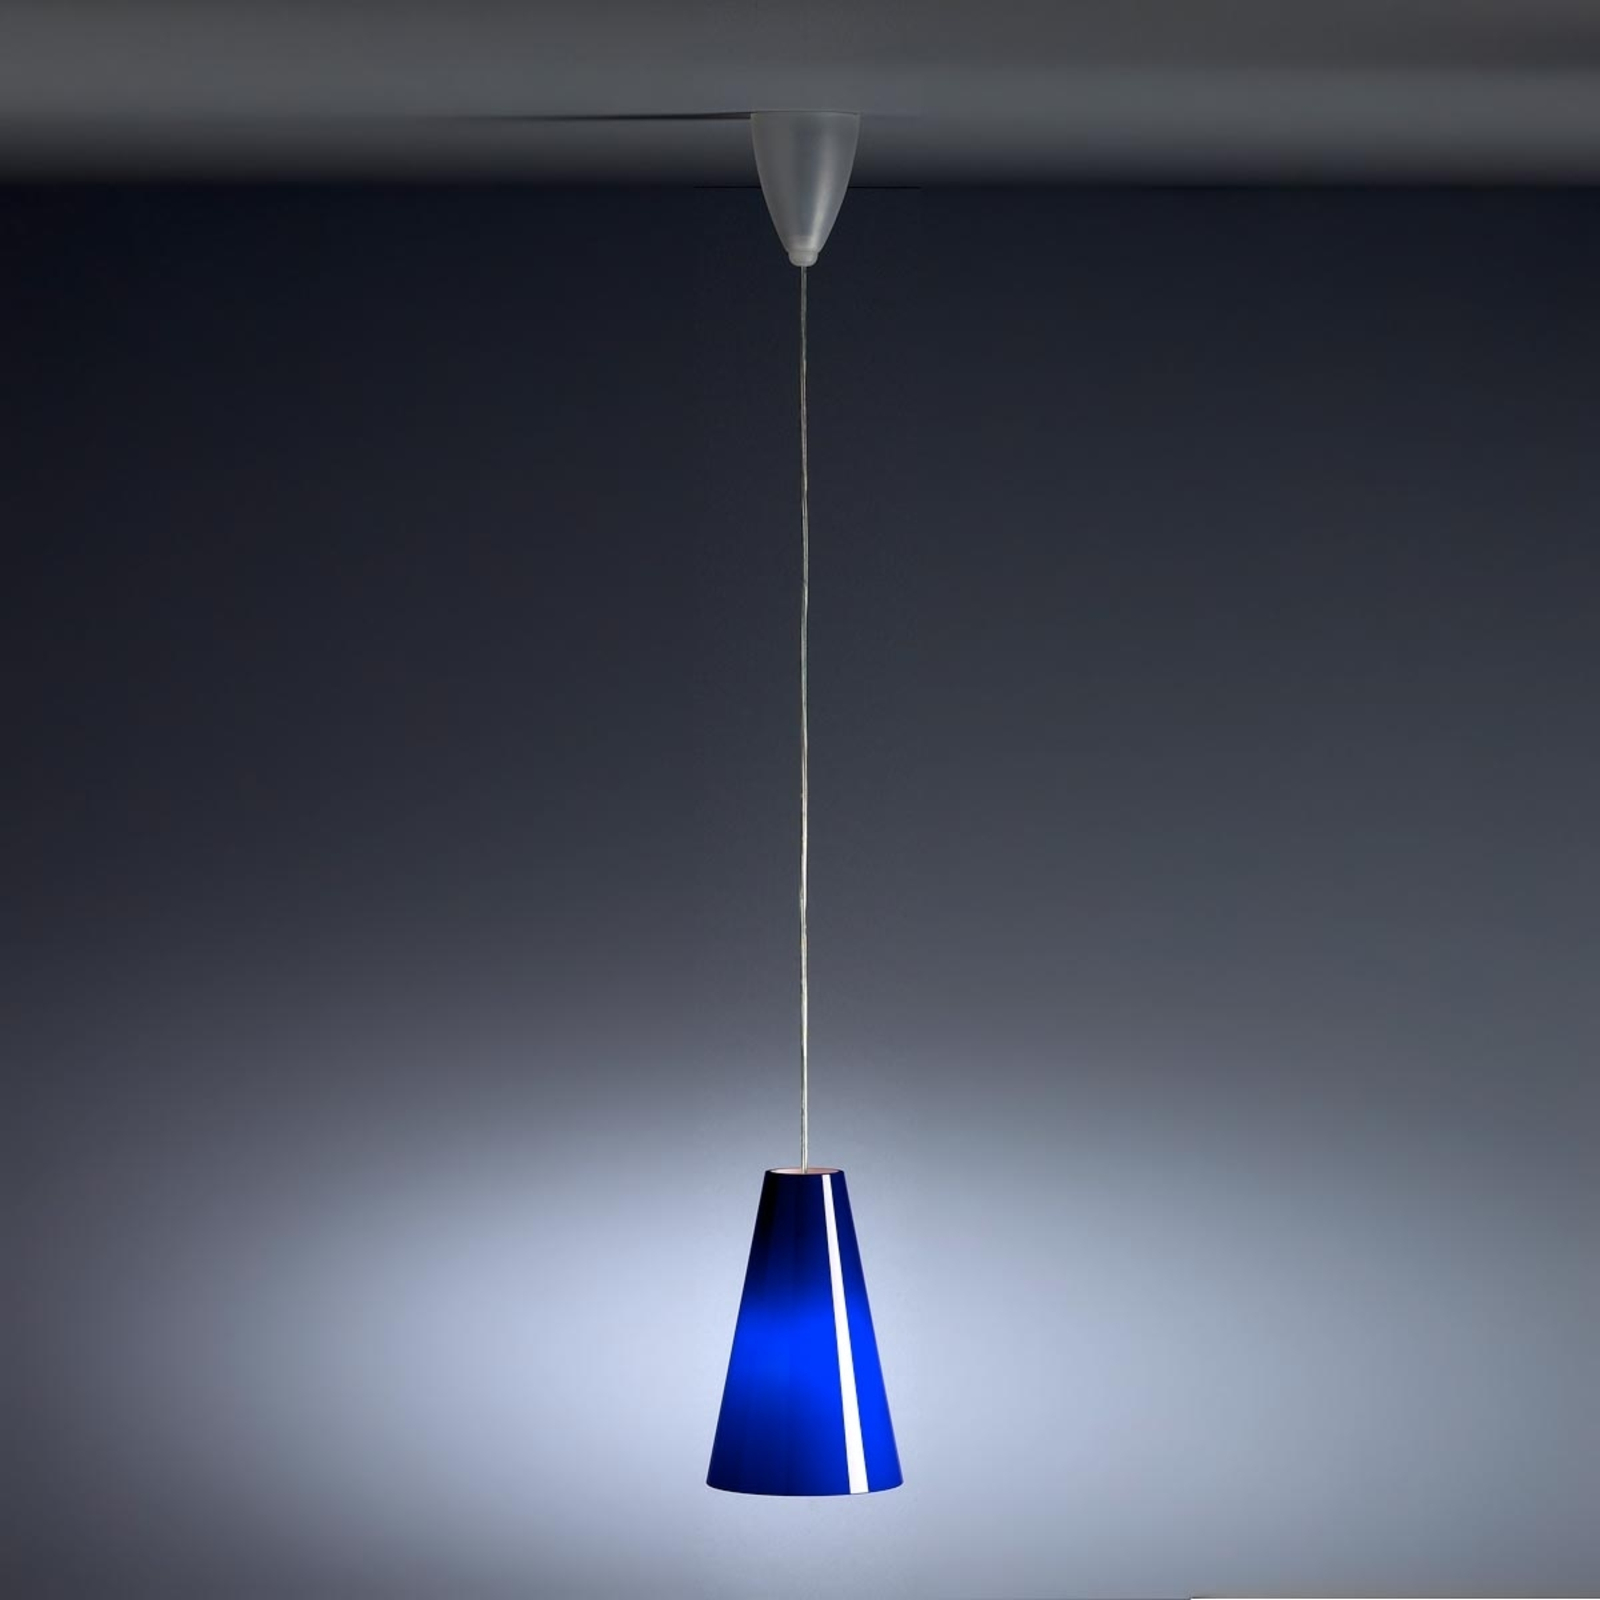 Hanging light by Schnepel, blue